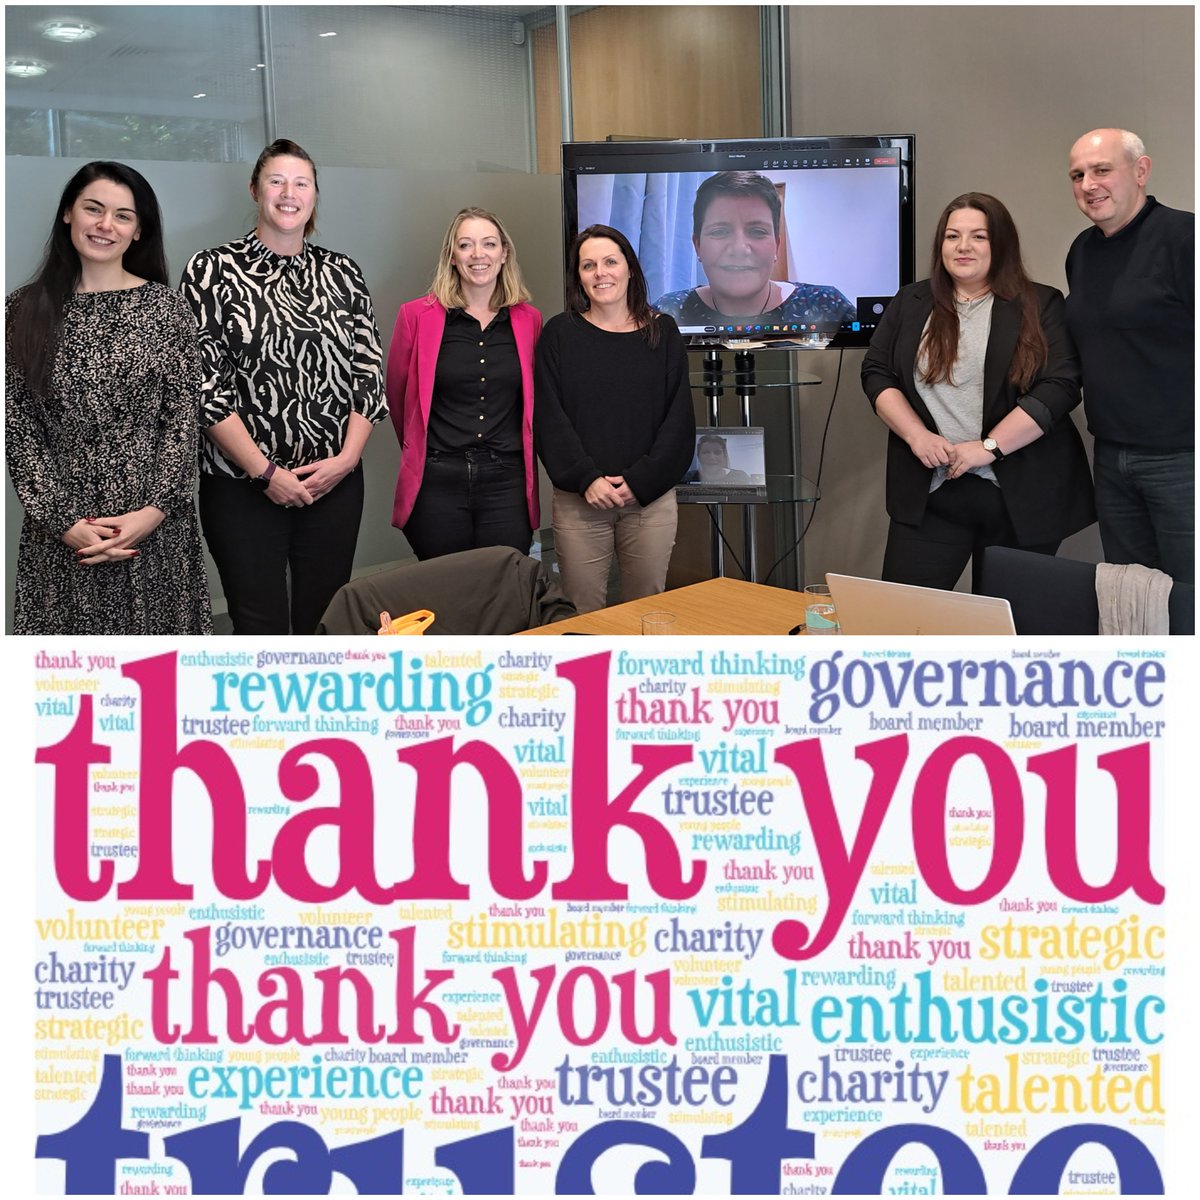 To celebrate #TrusteesWeek we want to say a massive thank you our Trustees for the time, expertise and support they give the charity throughout the year. Their leadership and governance is vital in ensuring we are able to make a real difference to the lives of young people.